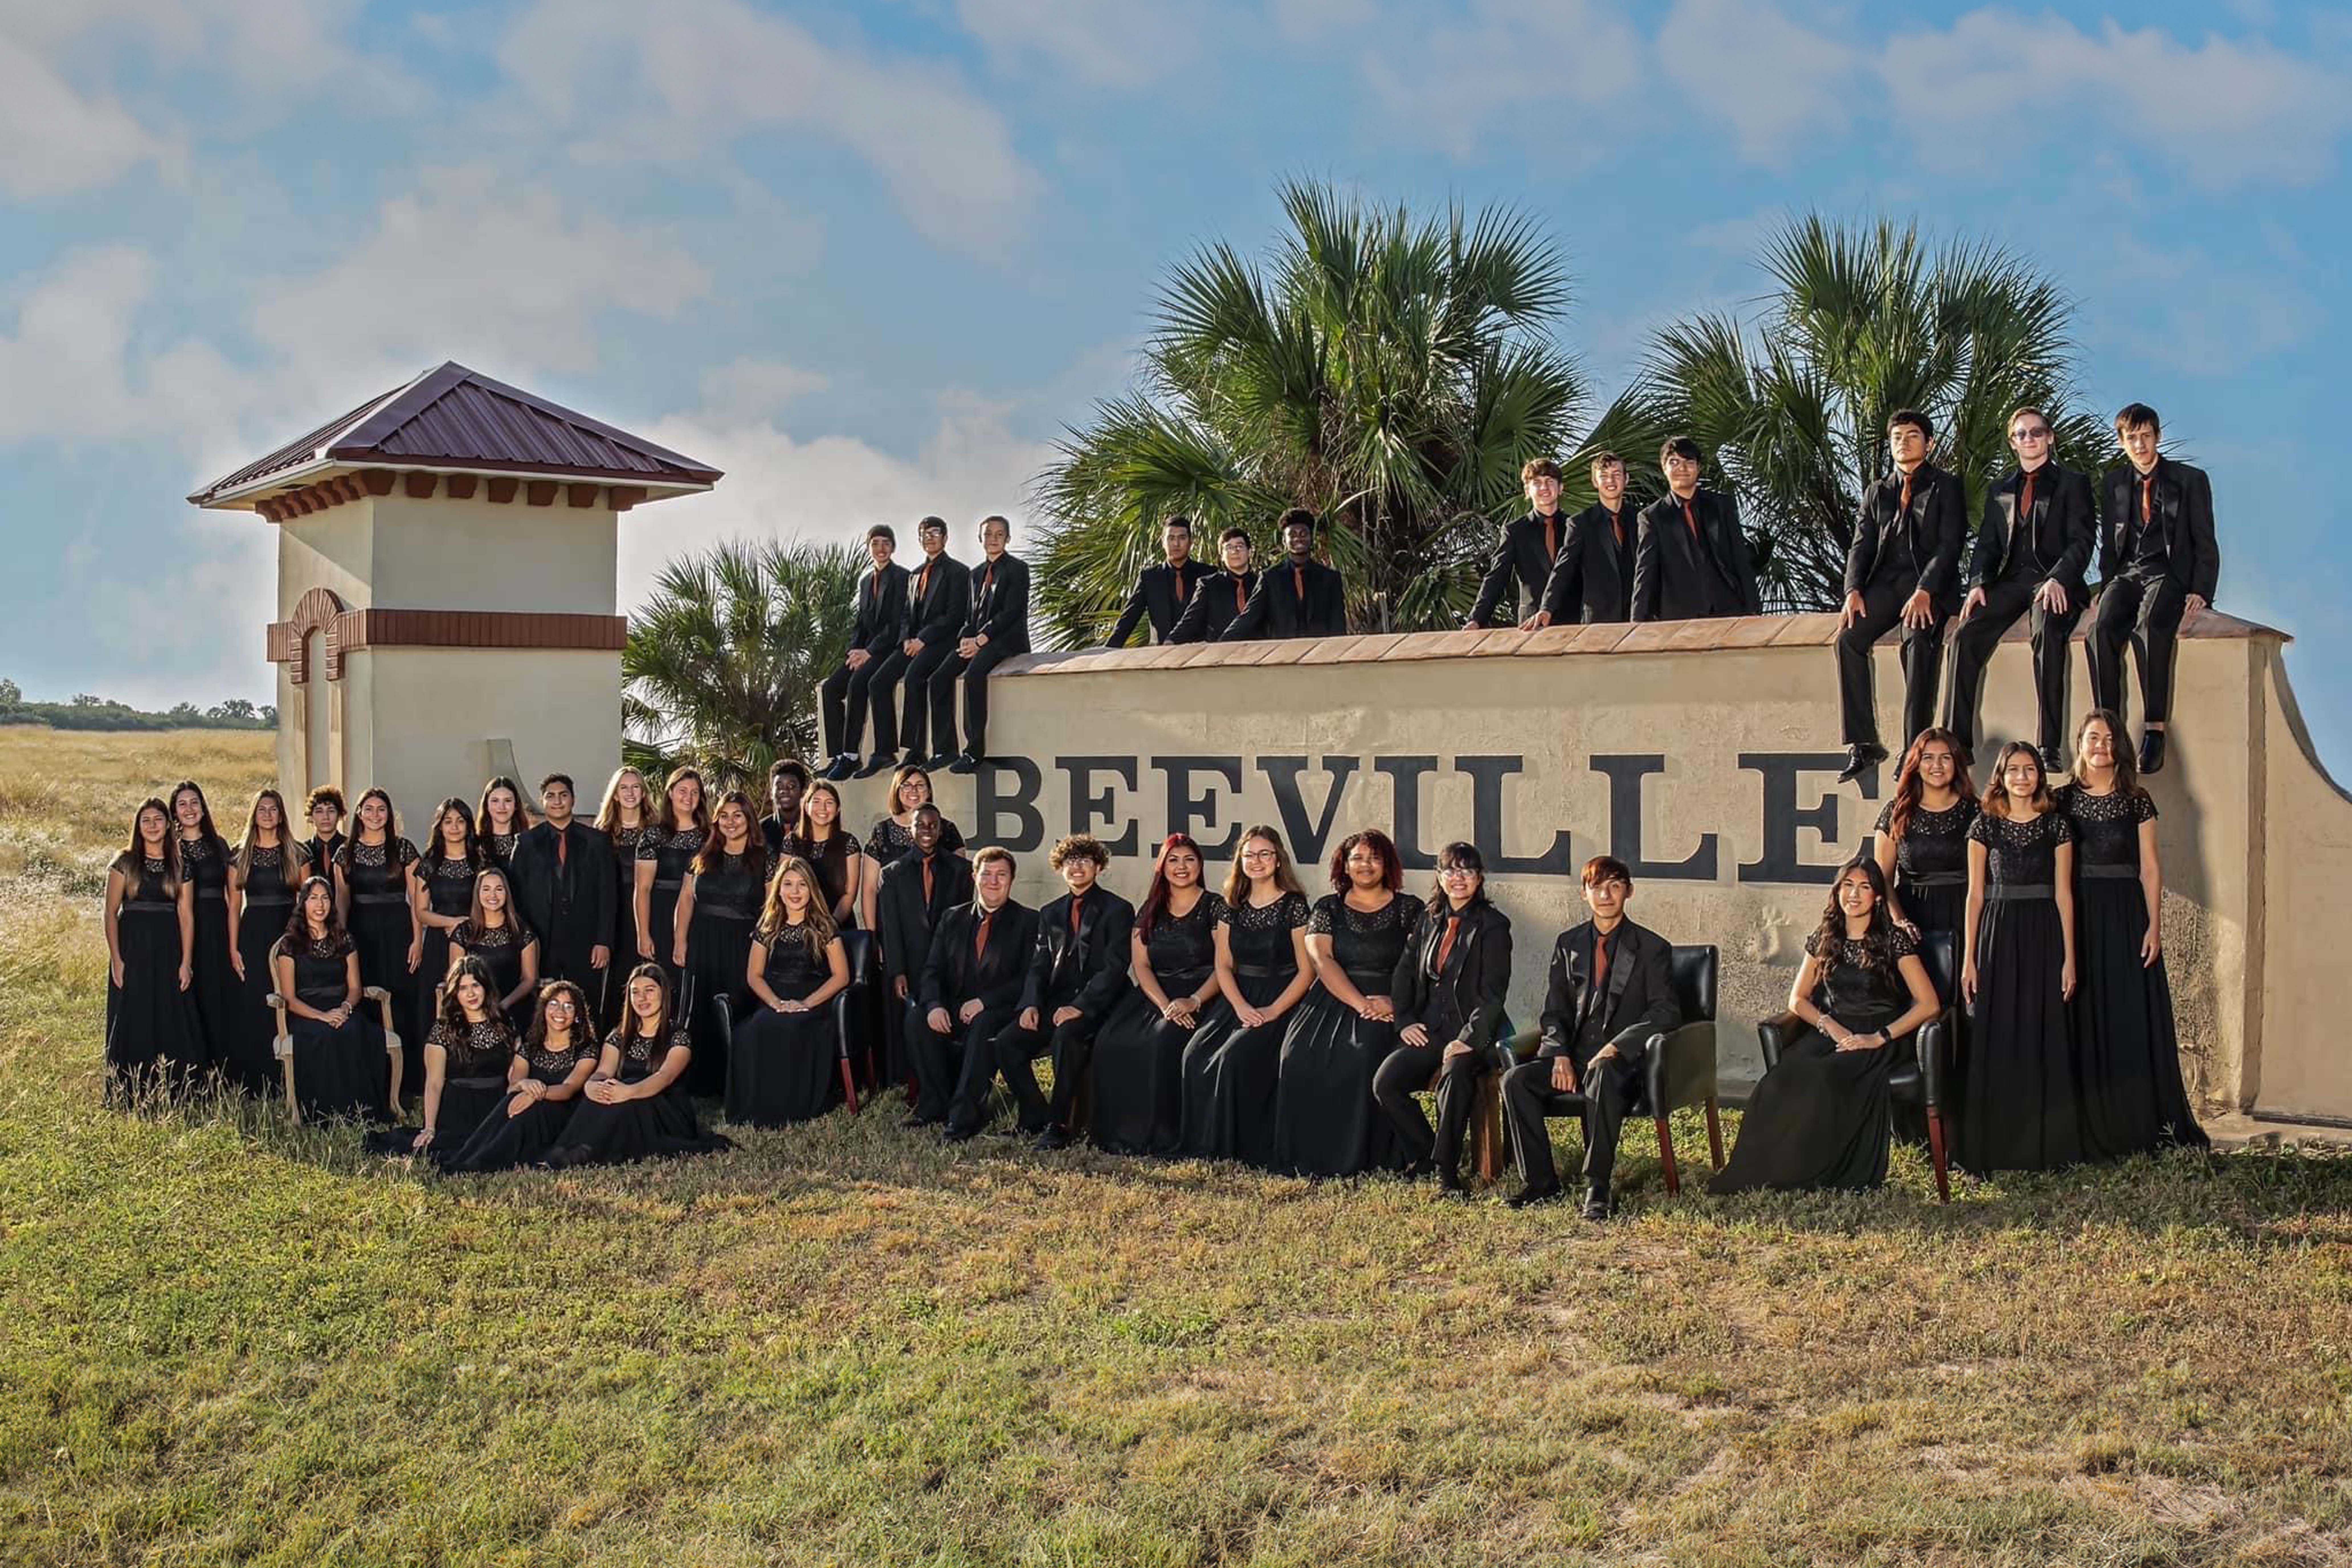 the beeville high school choir is all dressed up and taking a group picture in front of city's stone sign